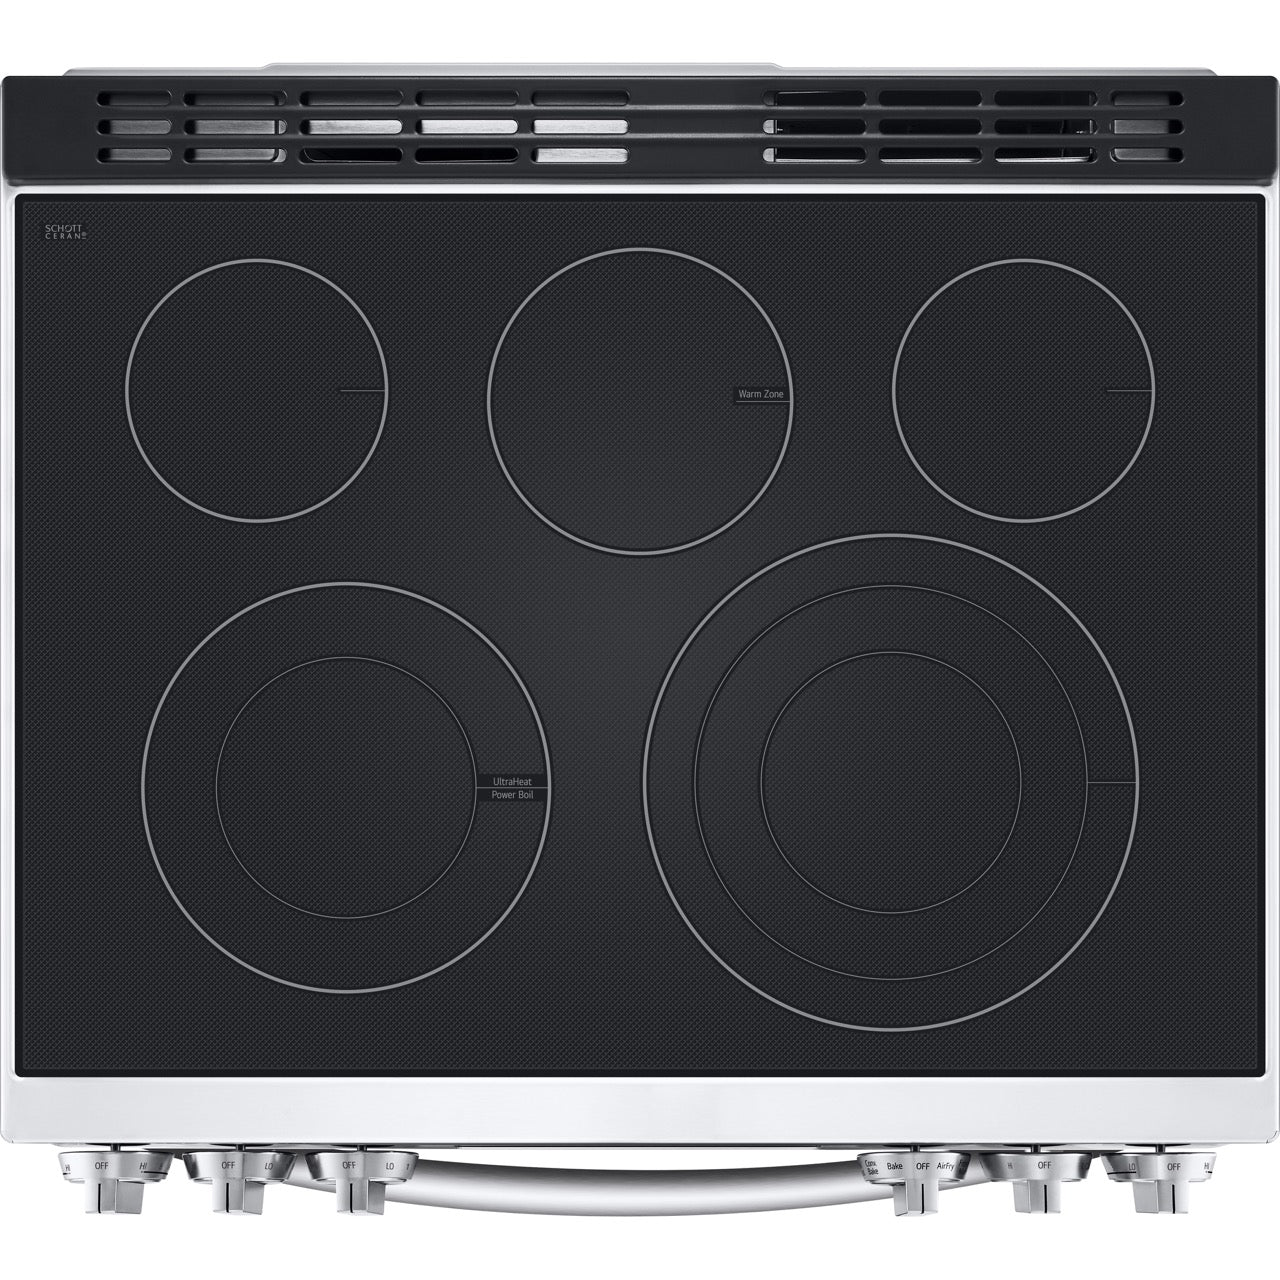 LG 6.3-Cu. Ft. Smart Wi-Fi Enabled ProBake Convection InstaView Electric Slide-in Range with Air Fry, Stainless Steel (LSEL6335F)